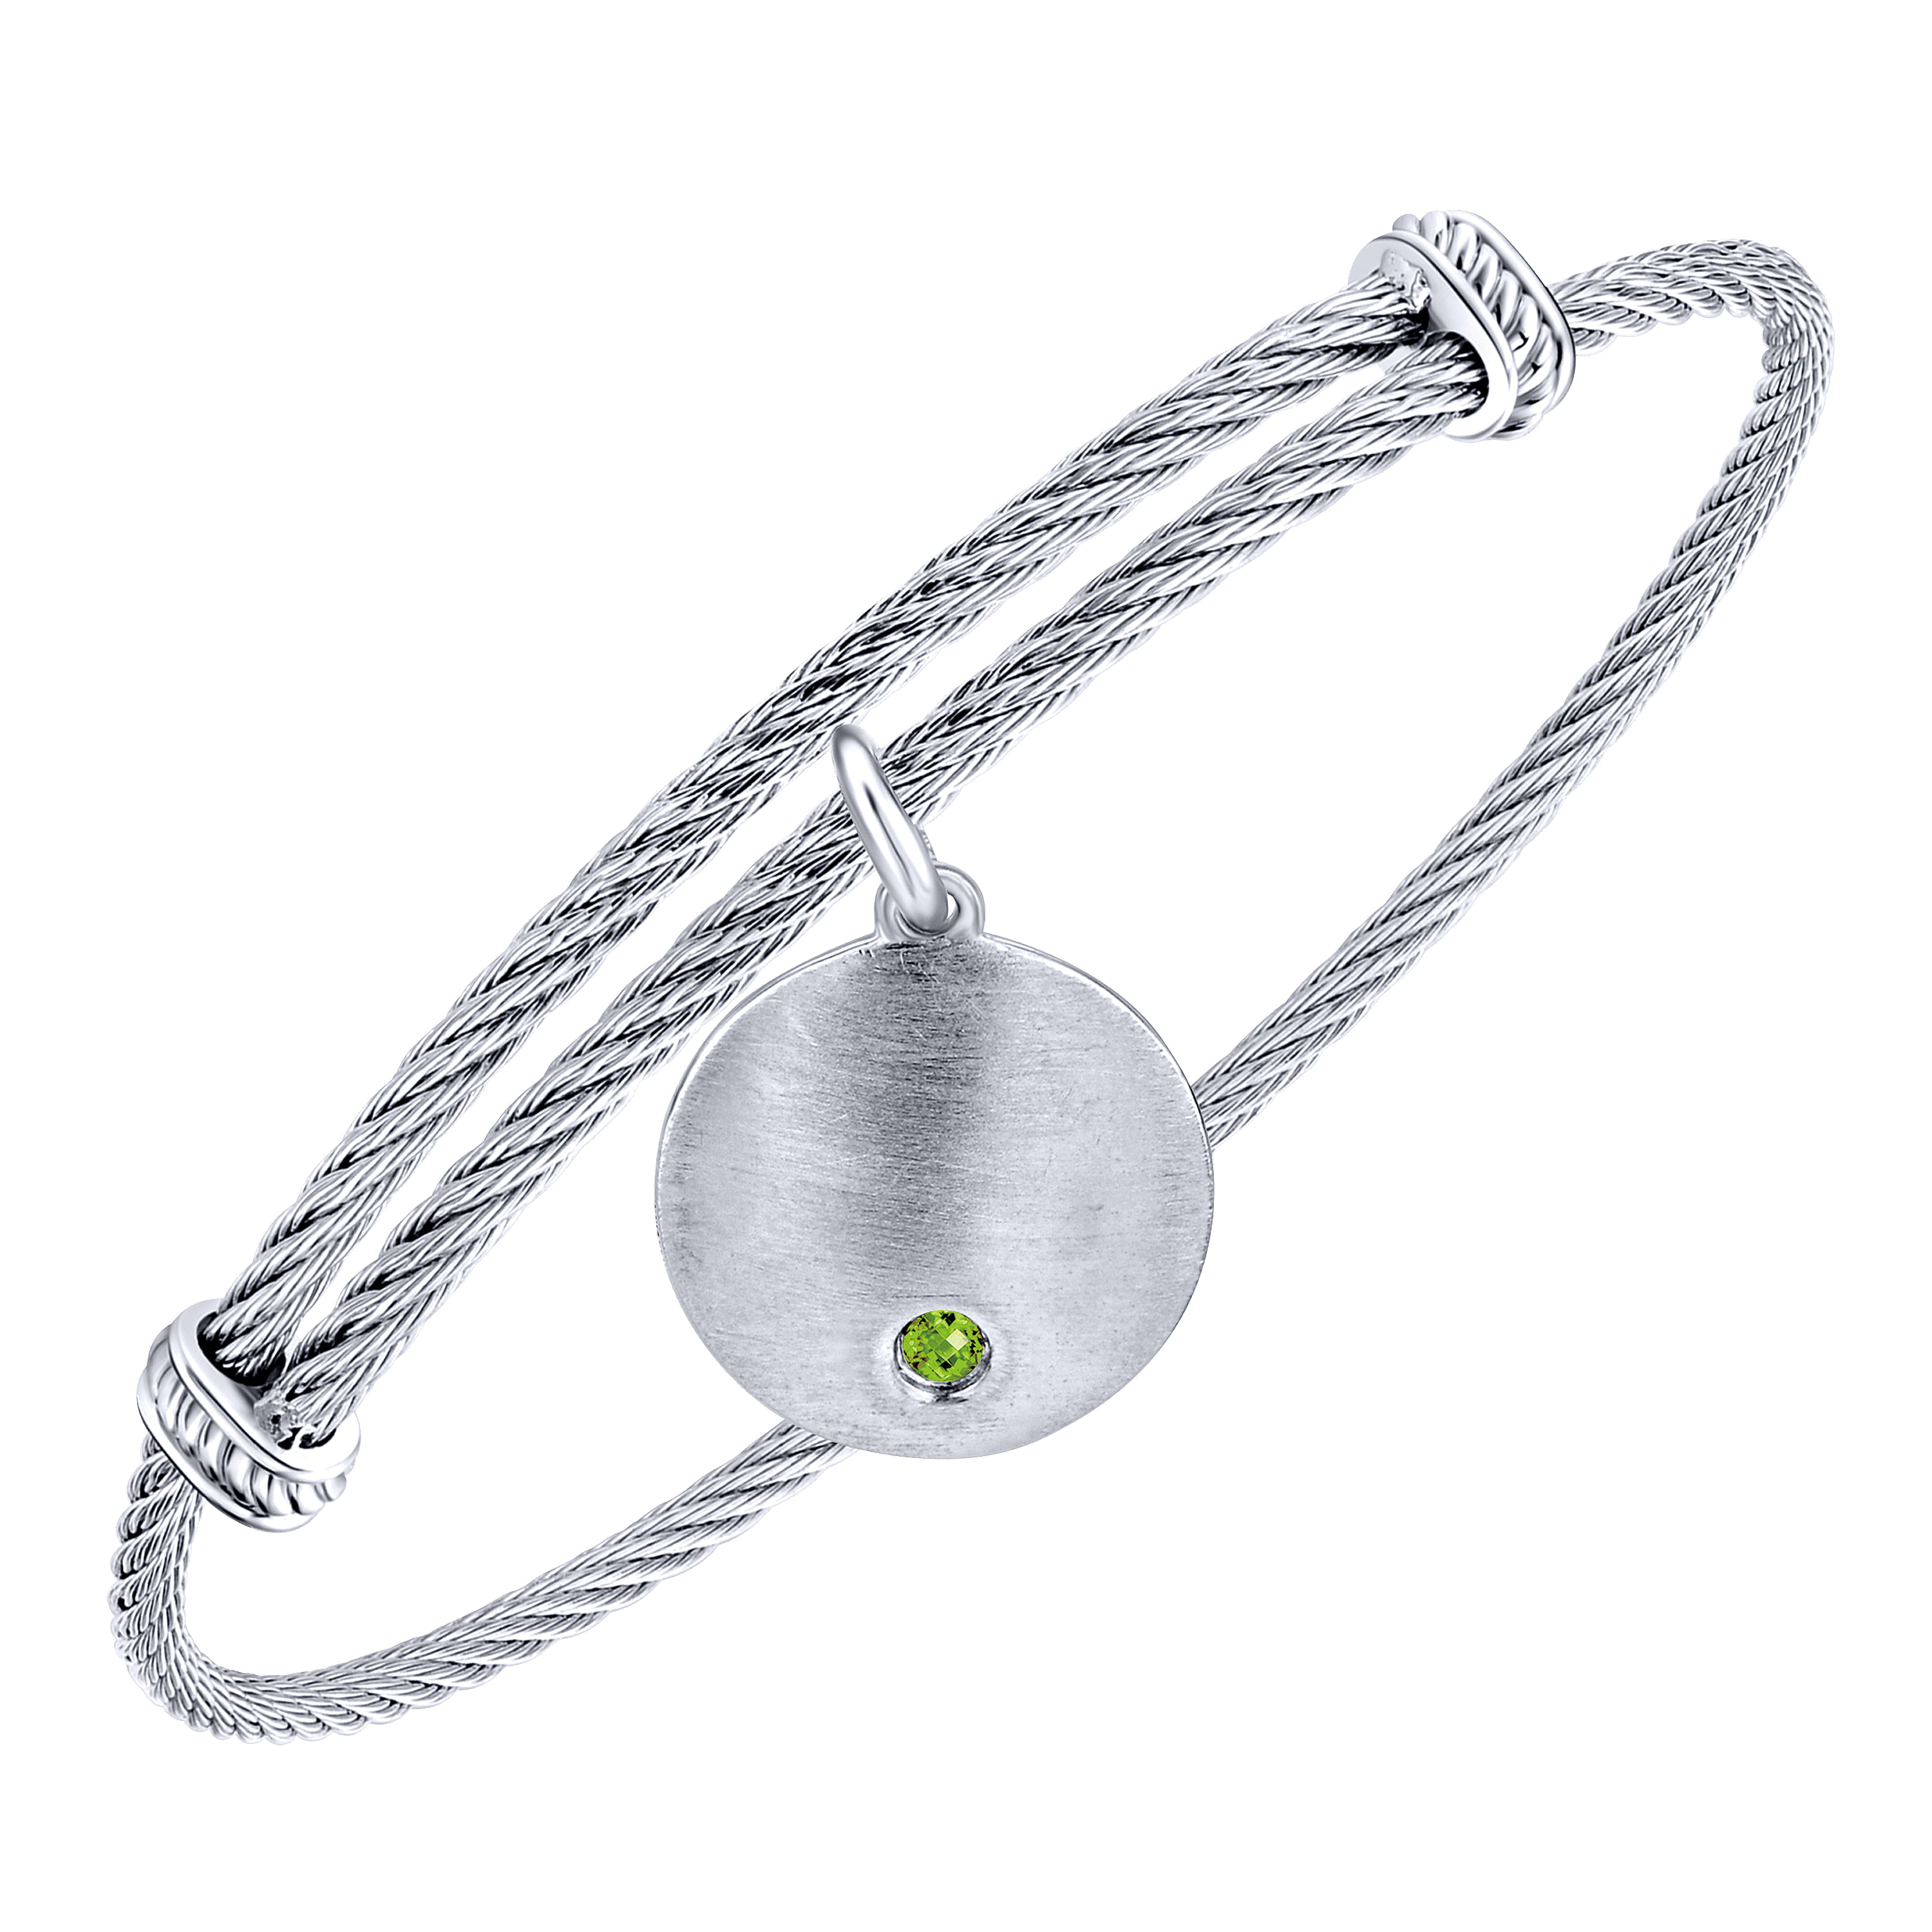 Adjustable Stainless Steel Bangle with Round Sterling Silver Peridot Stone Disc Charm